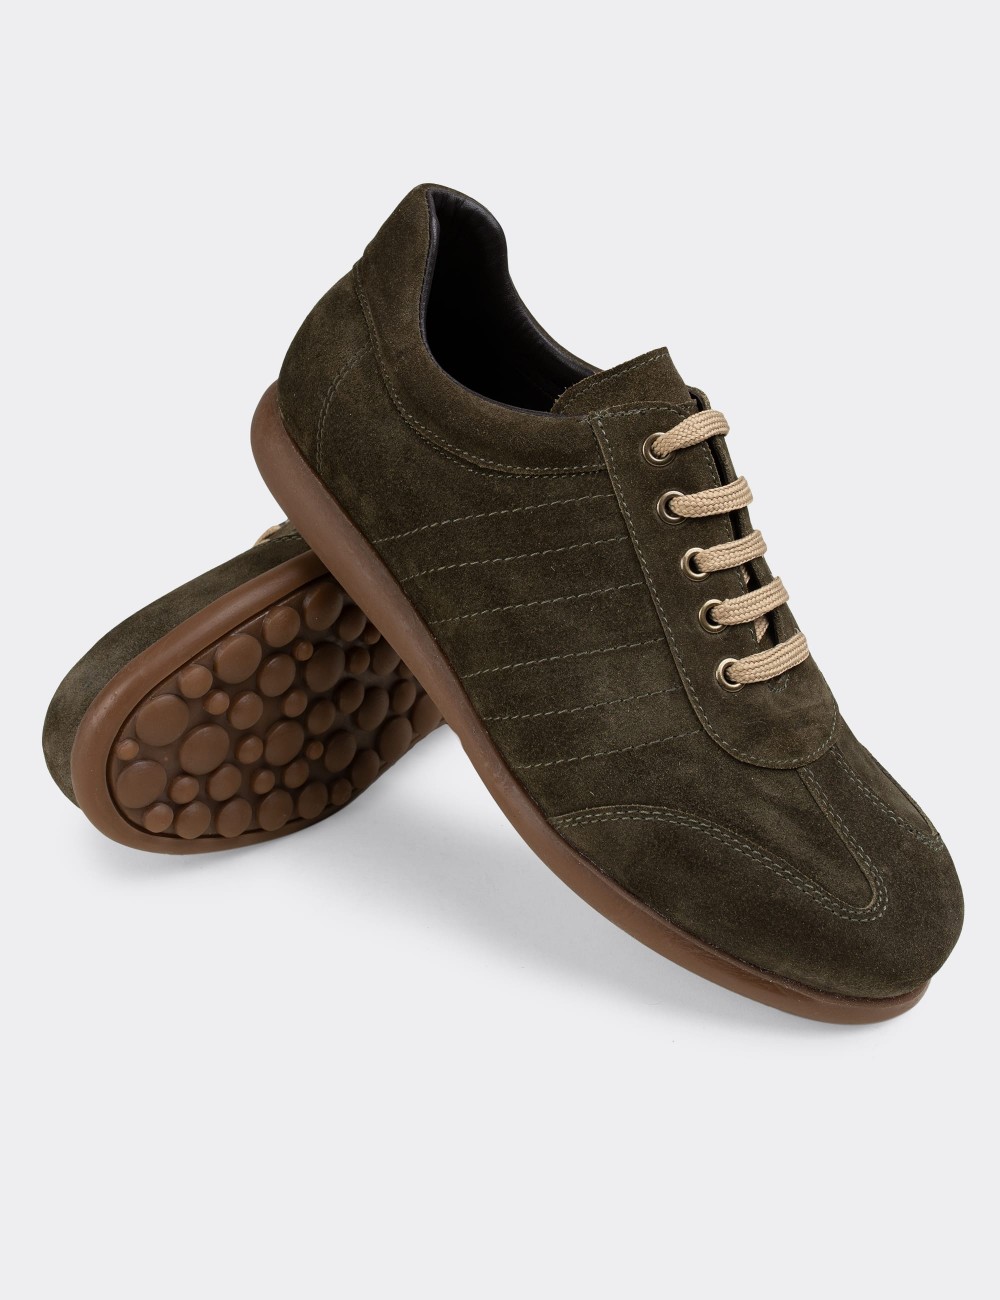 Green Suede Leather Lace-up Shoes - 01826MHAKC02